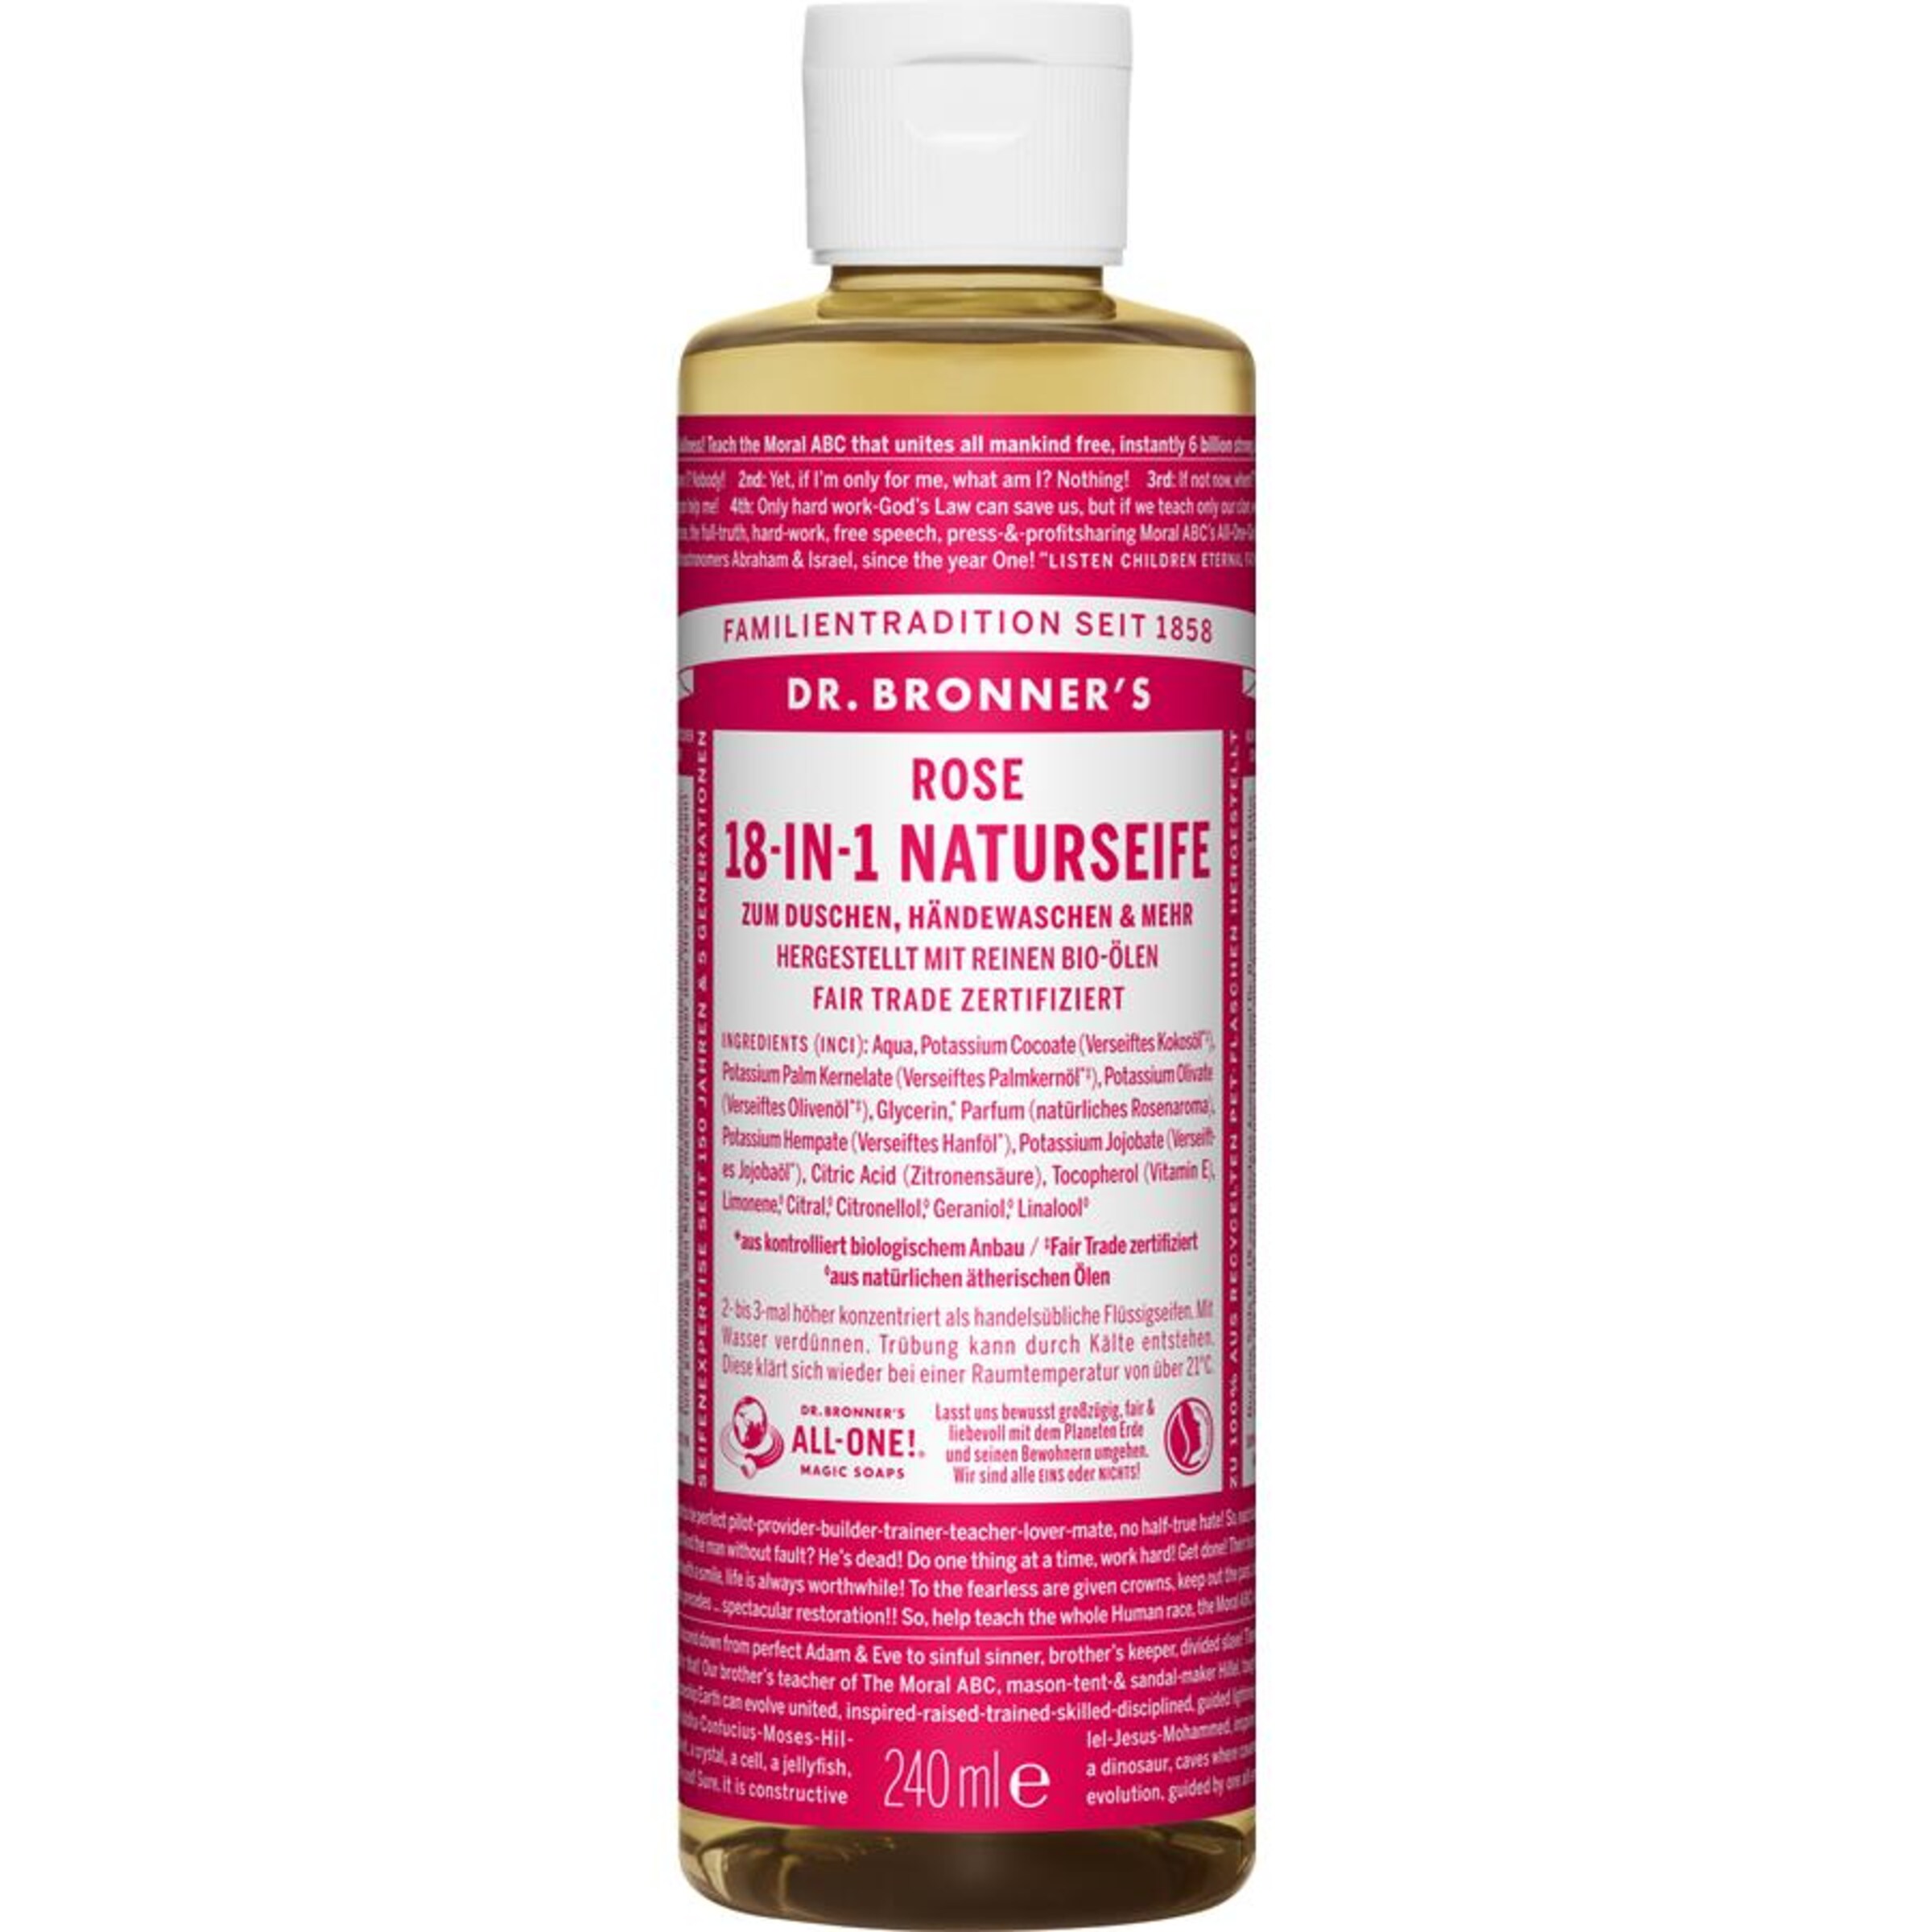 Dr. Bronners Naturseife 18-in-1 in 